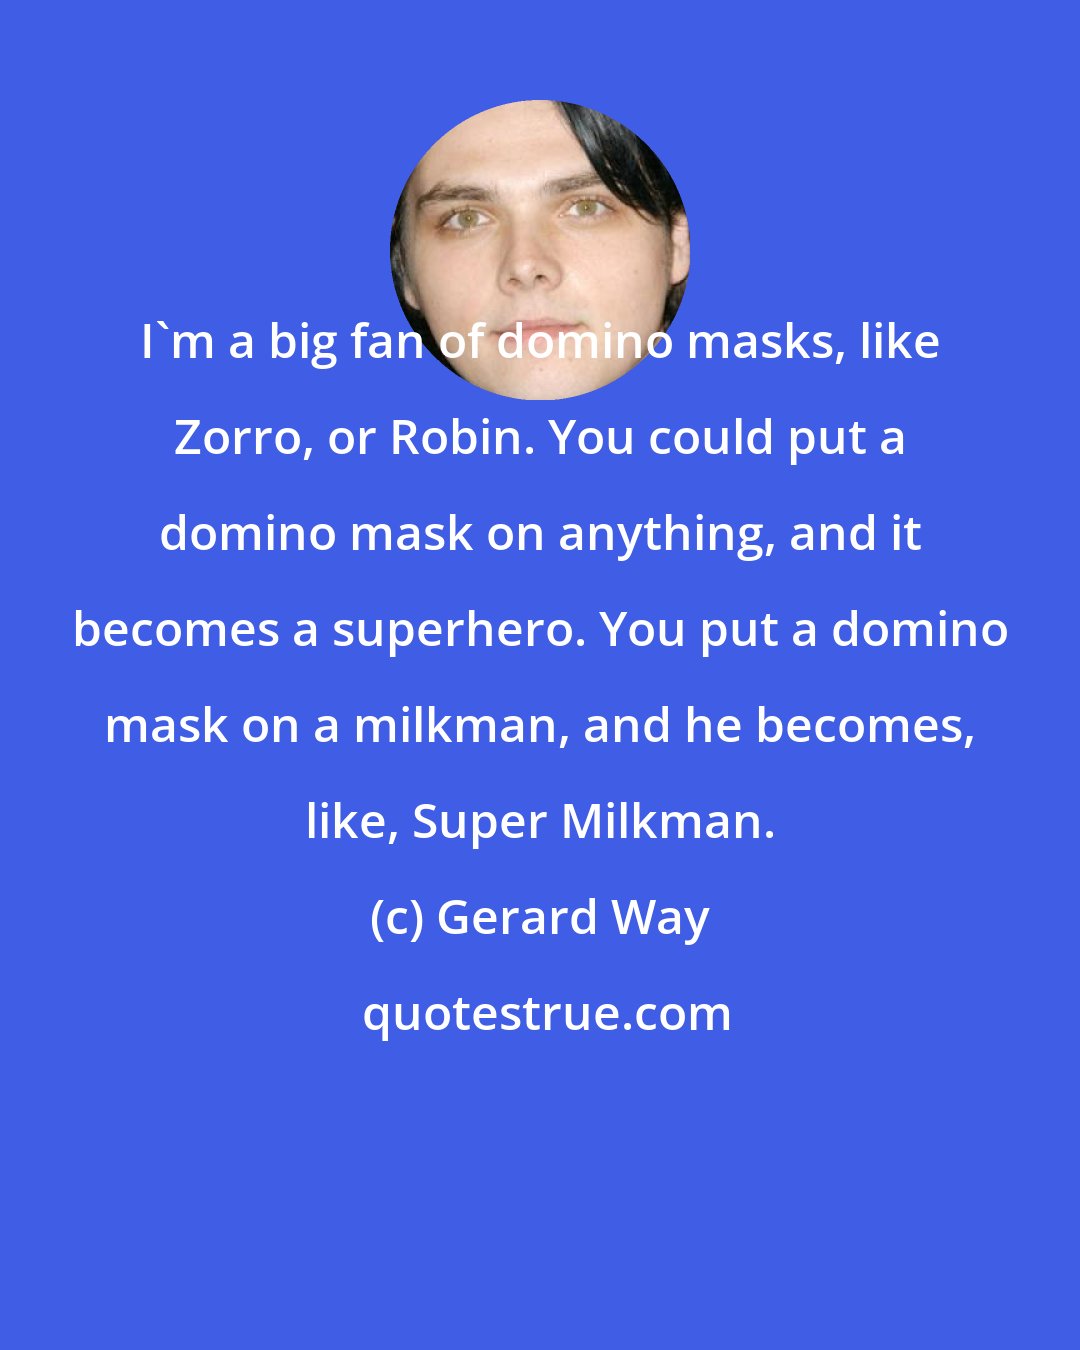 Gerard Way: I'm a big fan of domino masks, like Zorro, or Robin. You could put a domino mask on anything, and it becomes a superhero. You put a domino mask on a milkman, and he becomes, like, Super Milkman.